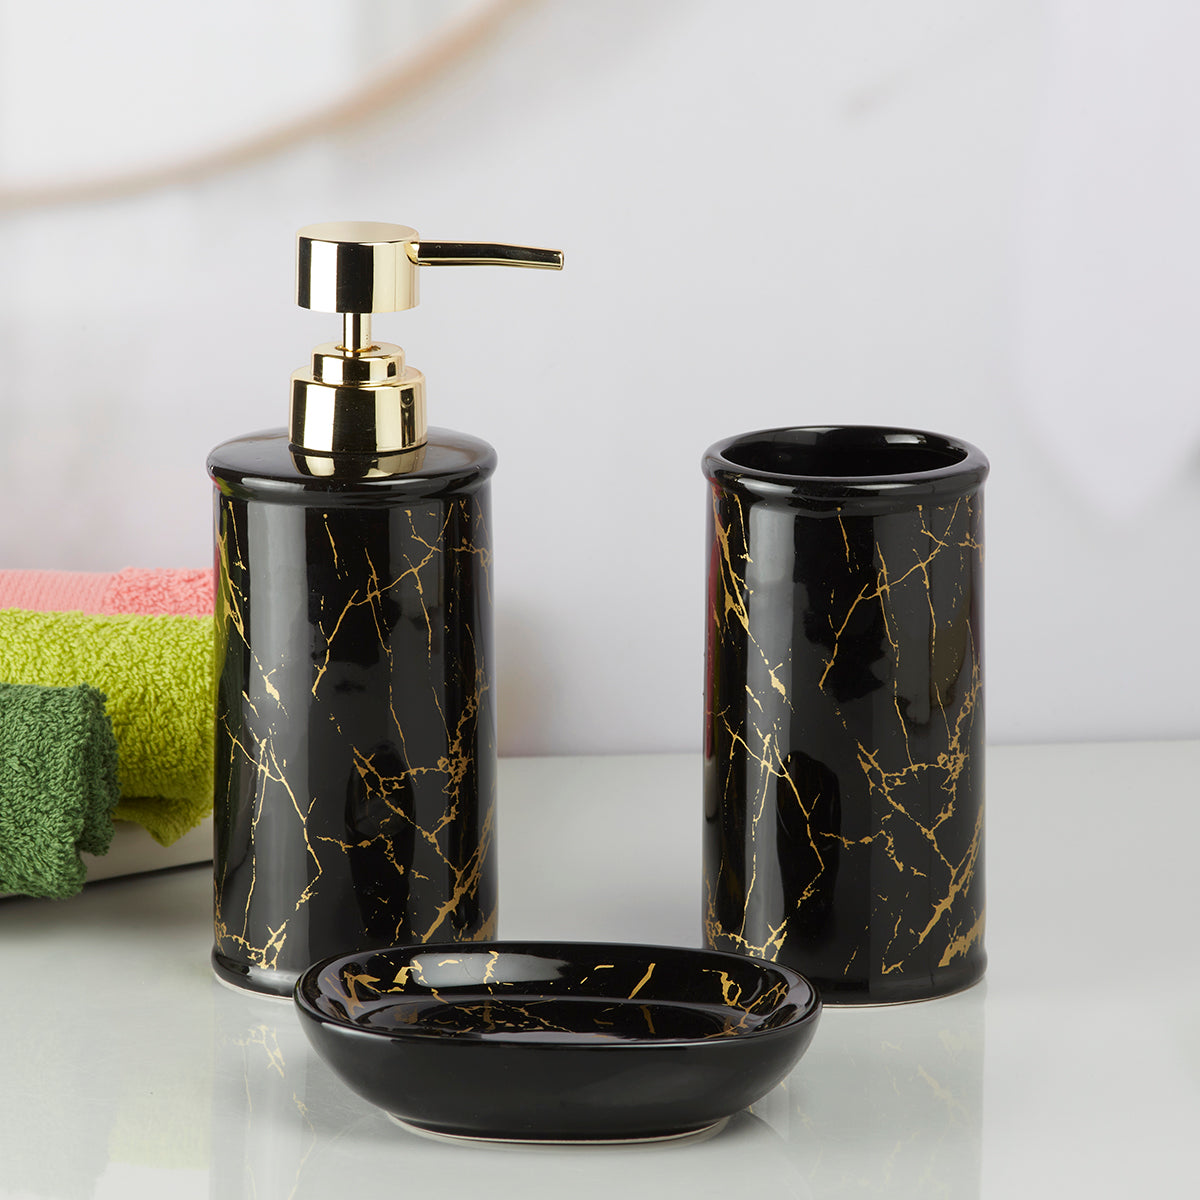 Kookee Ceramic Bathroom Accessories Set of 3, Modern Bath Set with Liquid handwash Soap Dispenser and Toothbrush holder, Luxury Gift Accessory for Home, Black/Gold (9728)